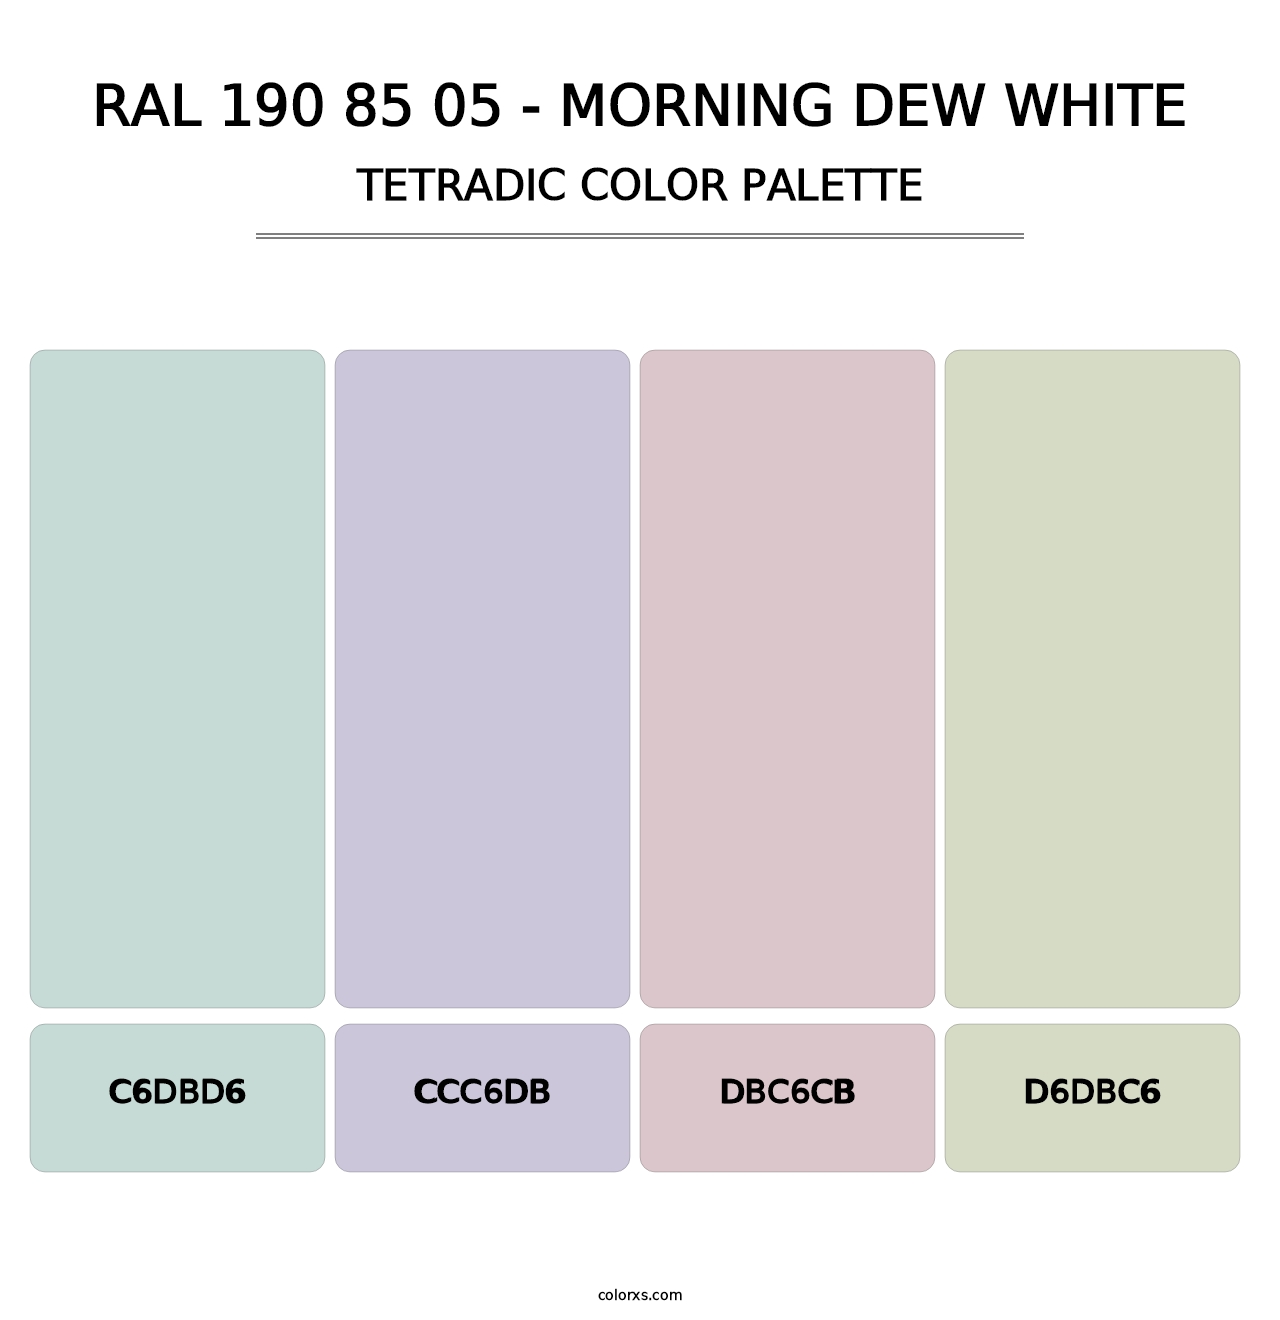 RAL 190 85 05 - Morning Dew White - Tetradic Color Palette